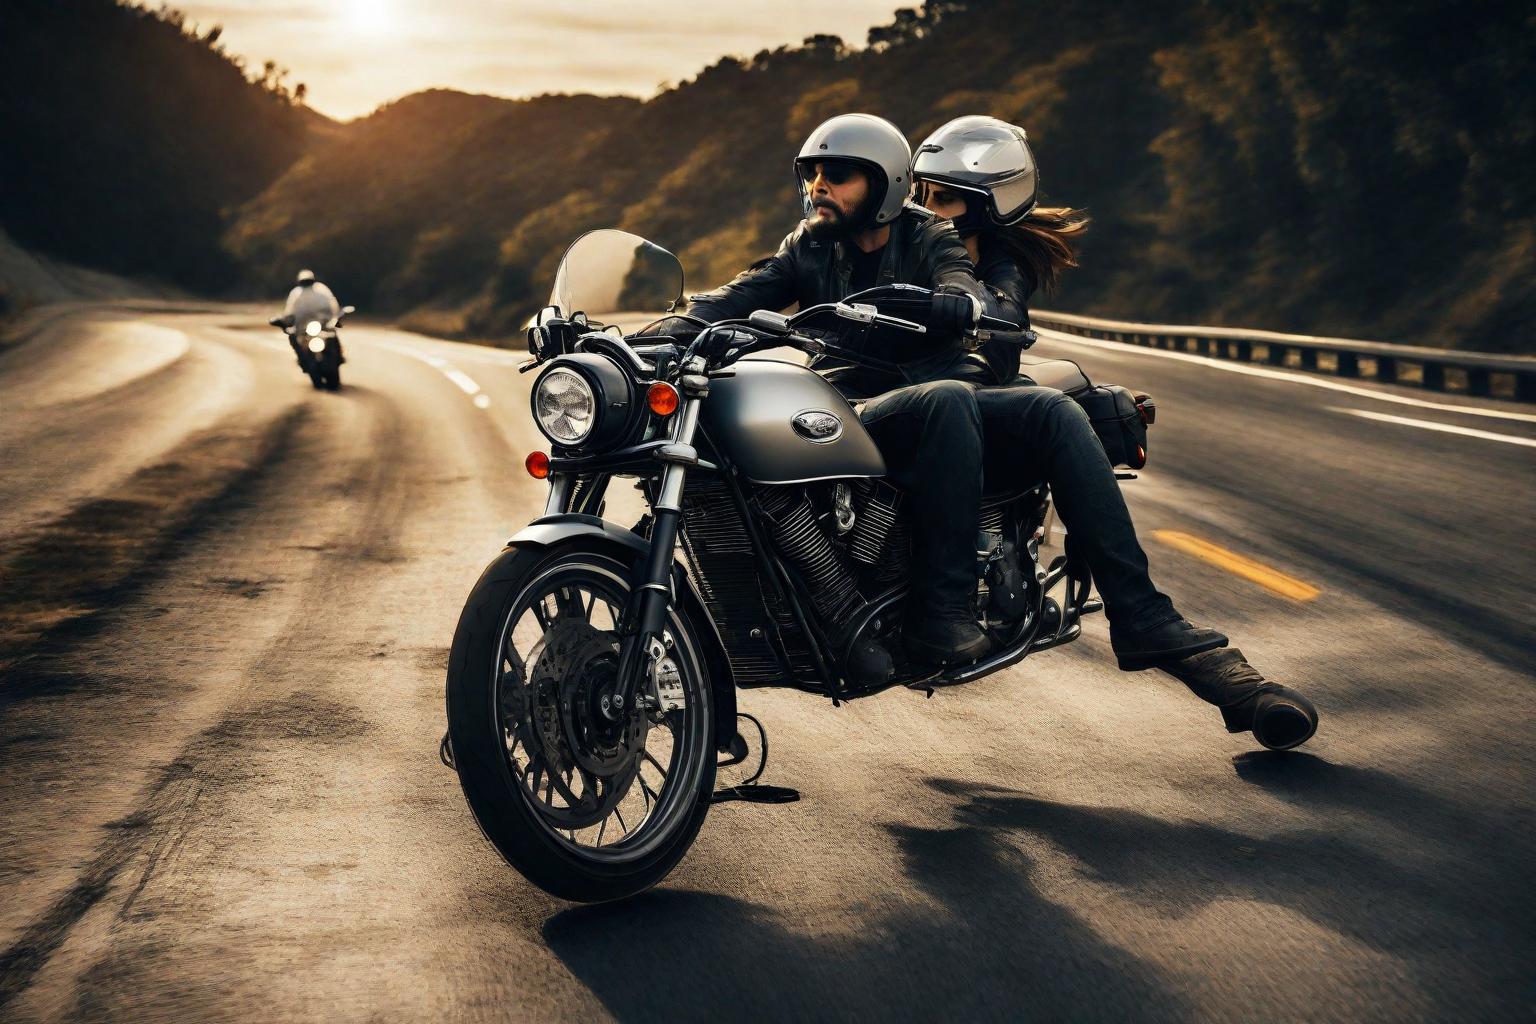 which states can you ride a motorcycle without a helmet